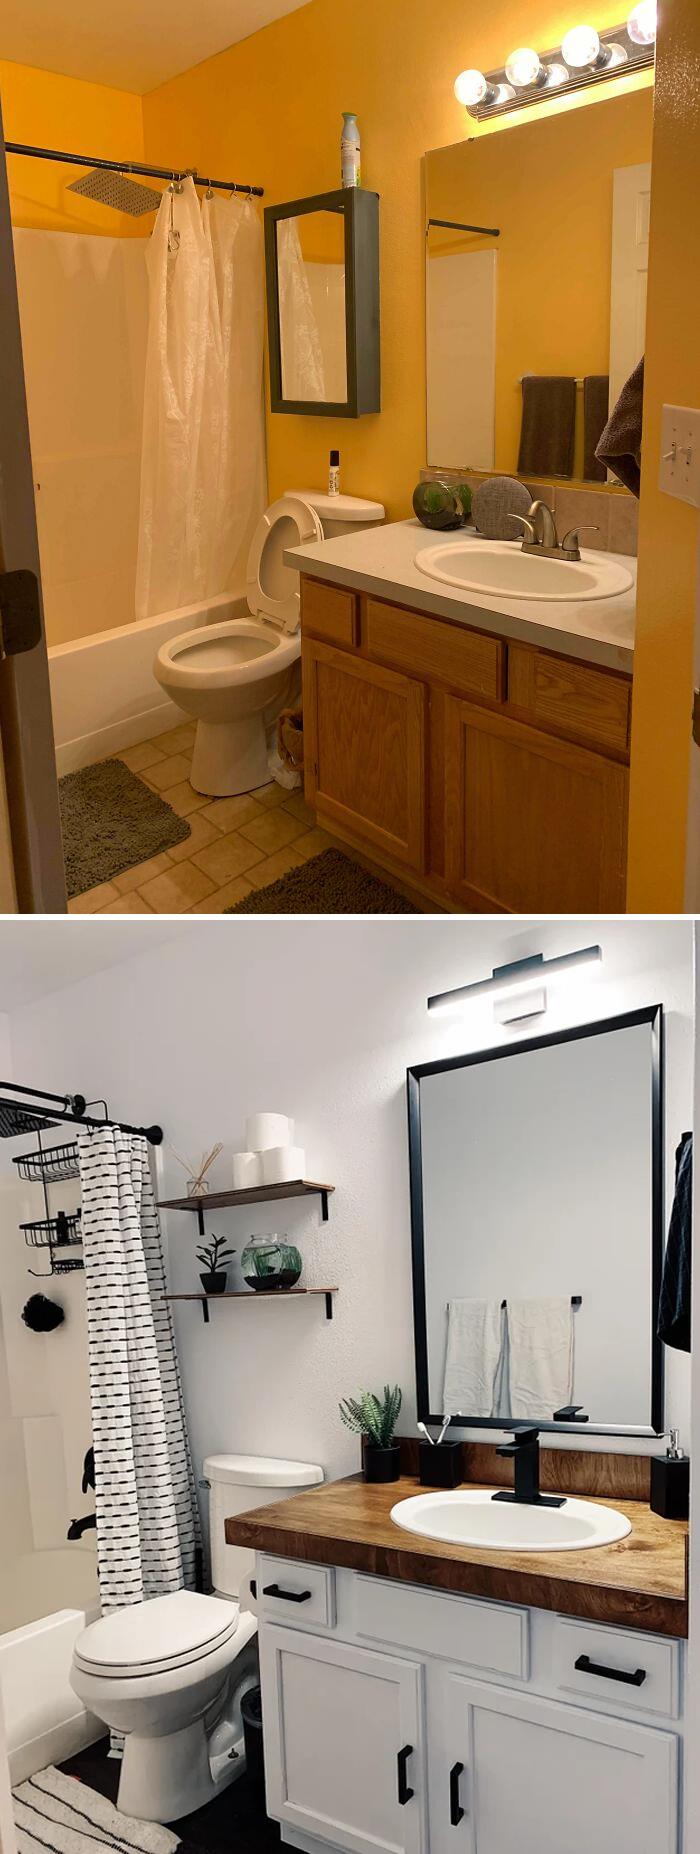 Small Bathroom Remodel. Before&after